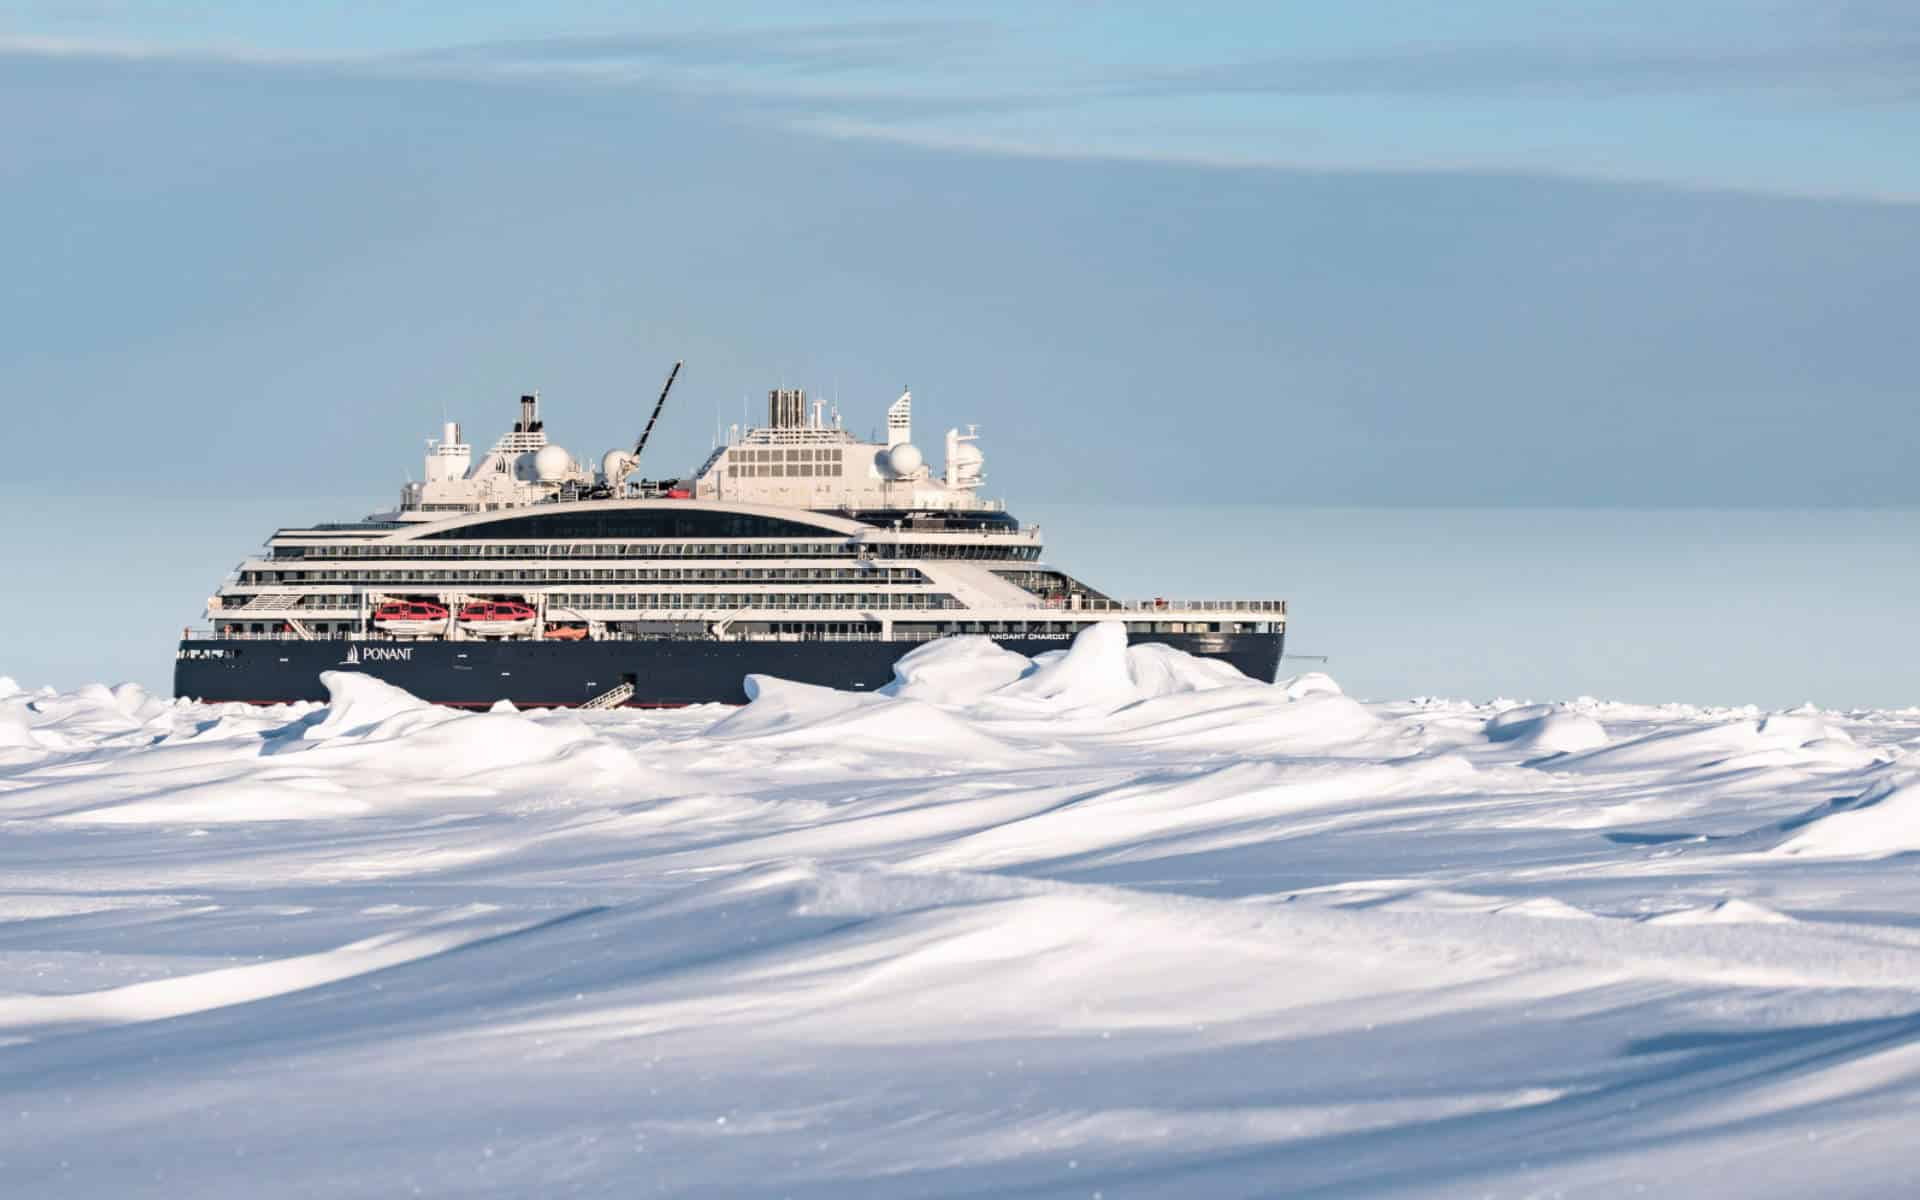 Le Commandant Charcot official launch sees the vessel embark on polar expeditions.